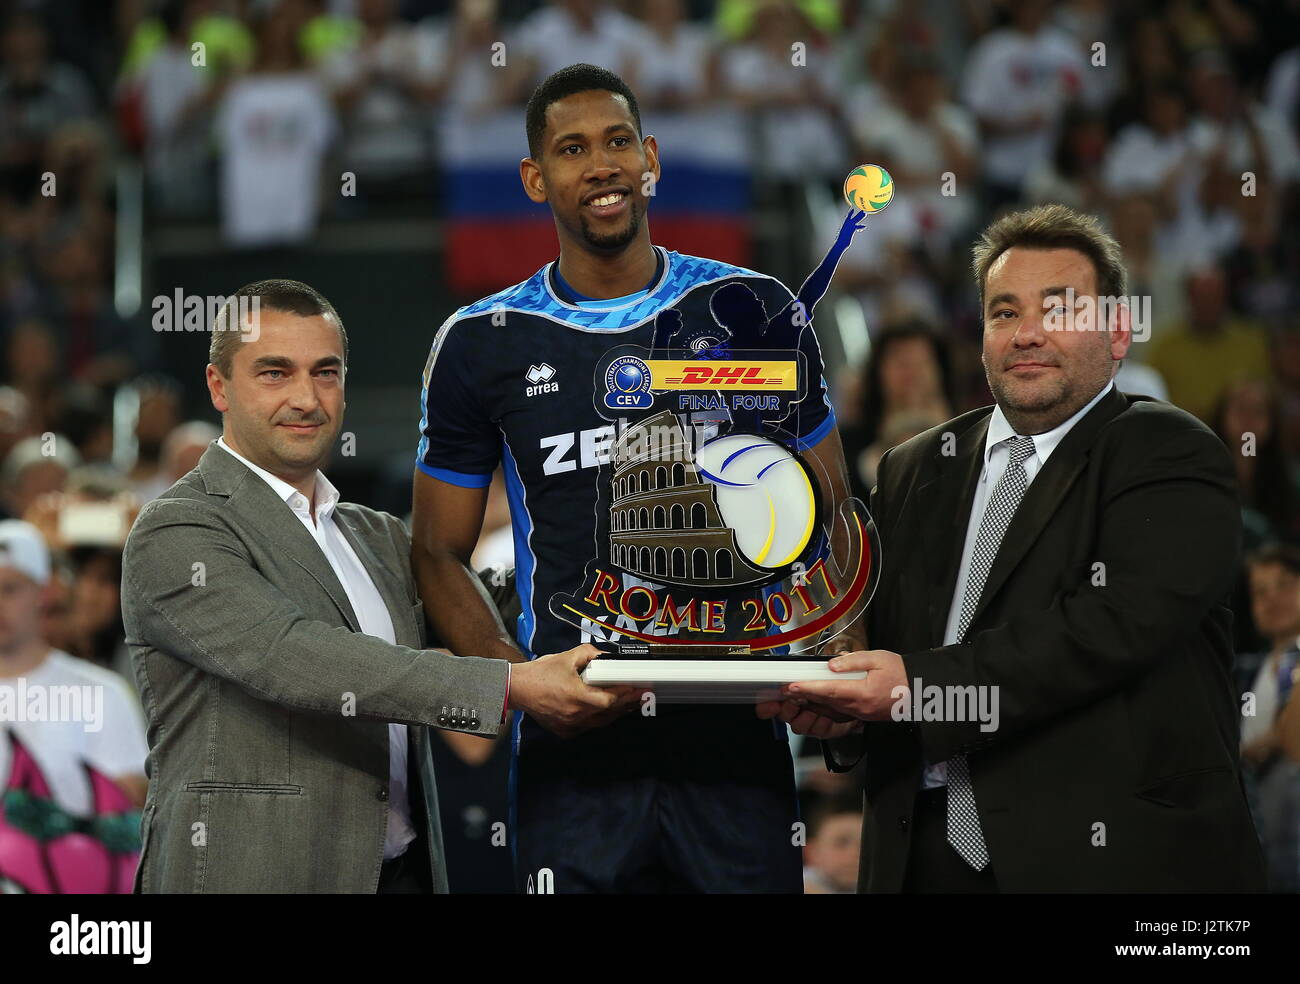 ROME, ITALY - APRIL 30, 2017: Zenit Kazan's Wilfredo Leon (C) celebrates  winning their 2016/17 Season CEV Champions League Final Four final  volleyball match against Sir Sicoma Colussi Perugia at Rome's  PalaLottomatica